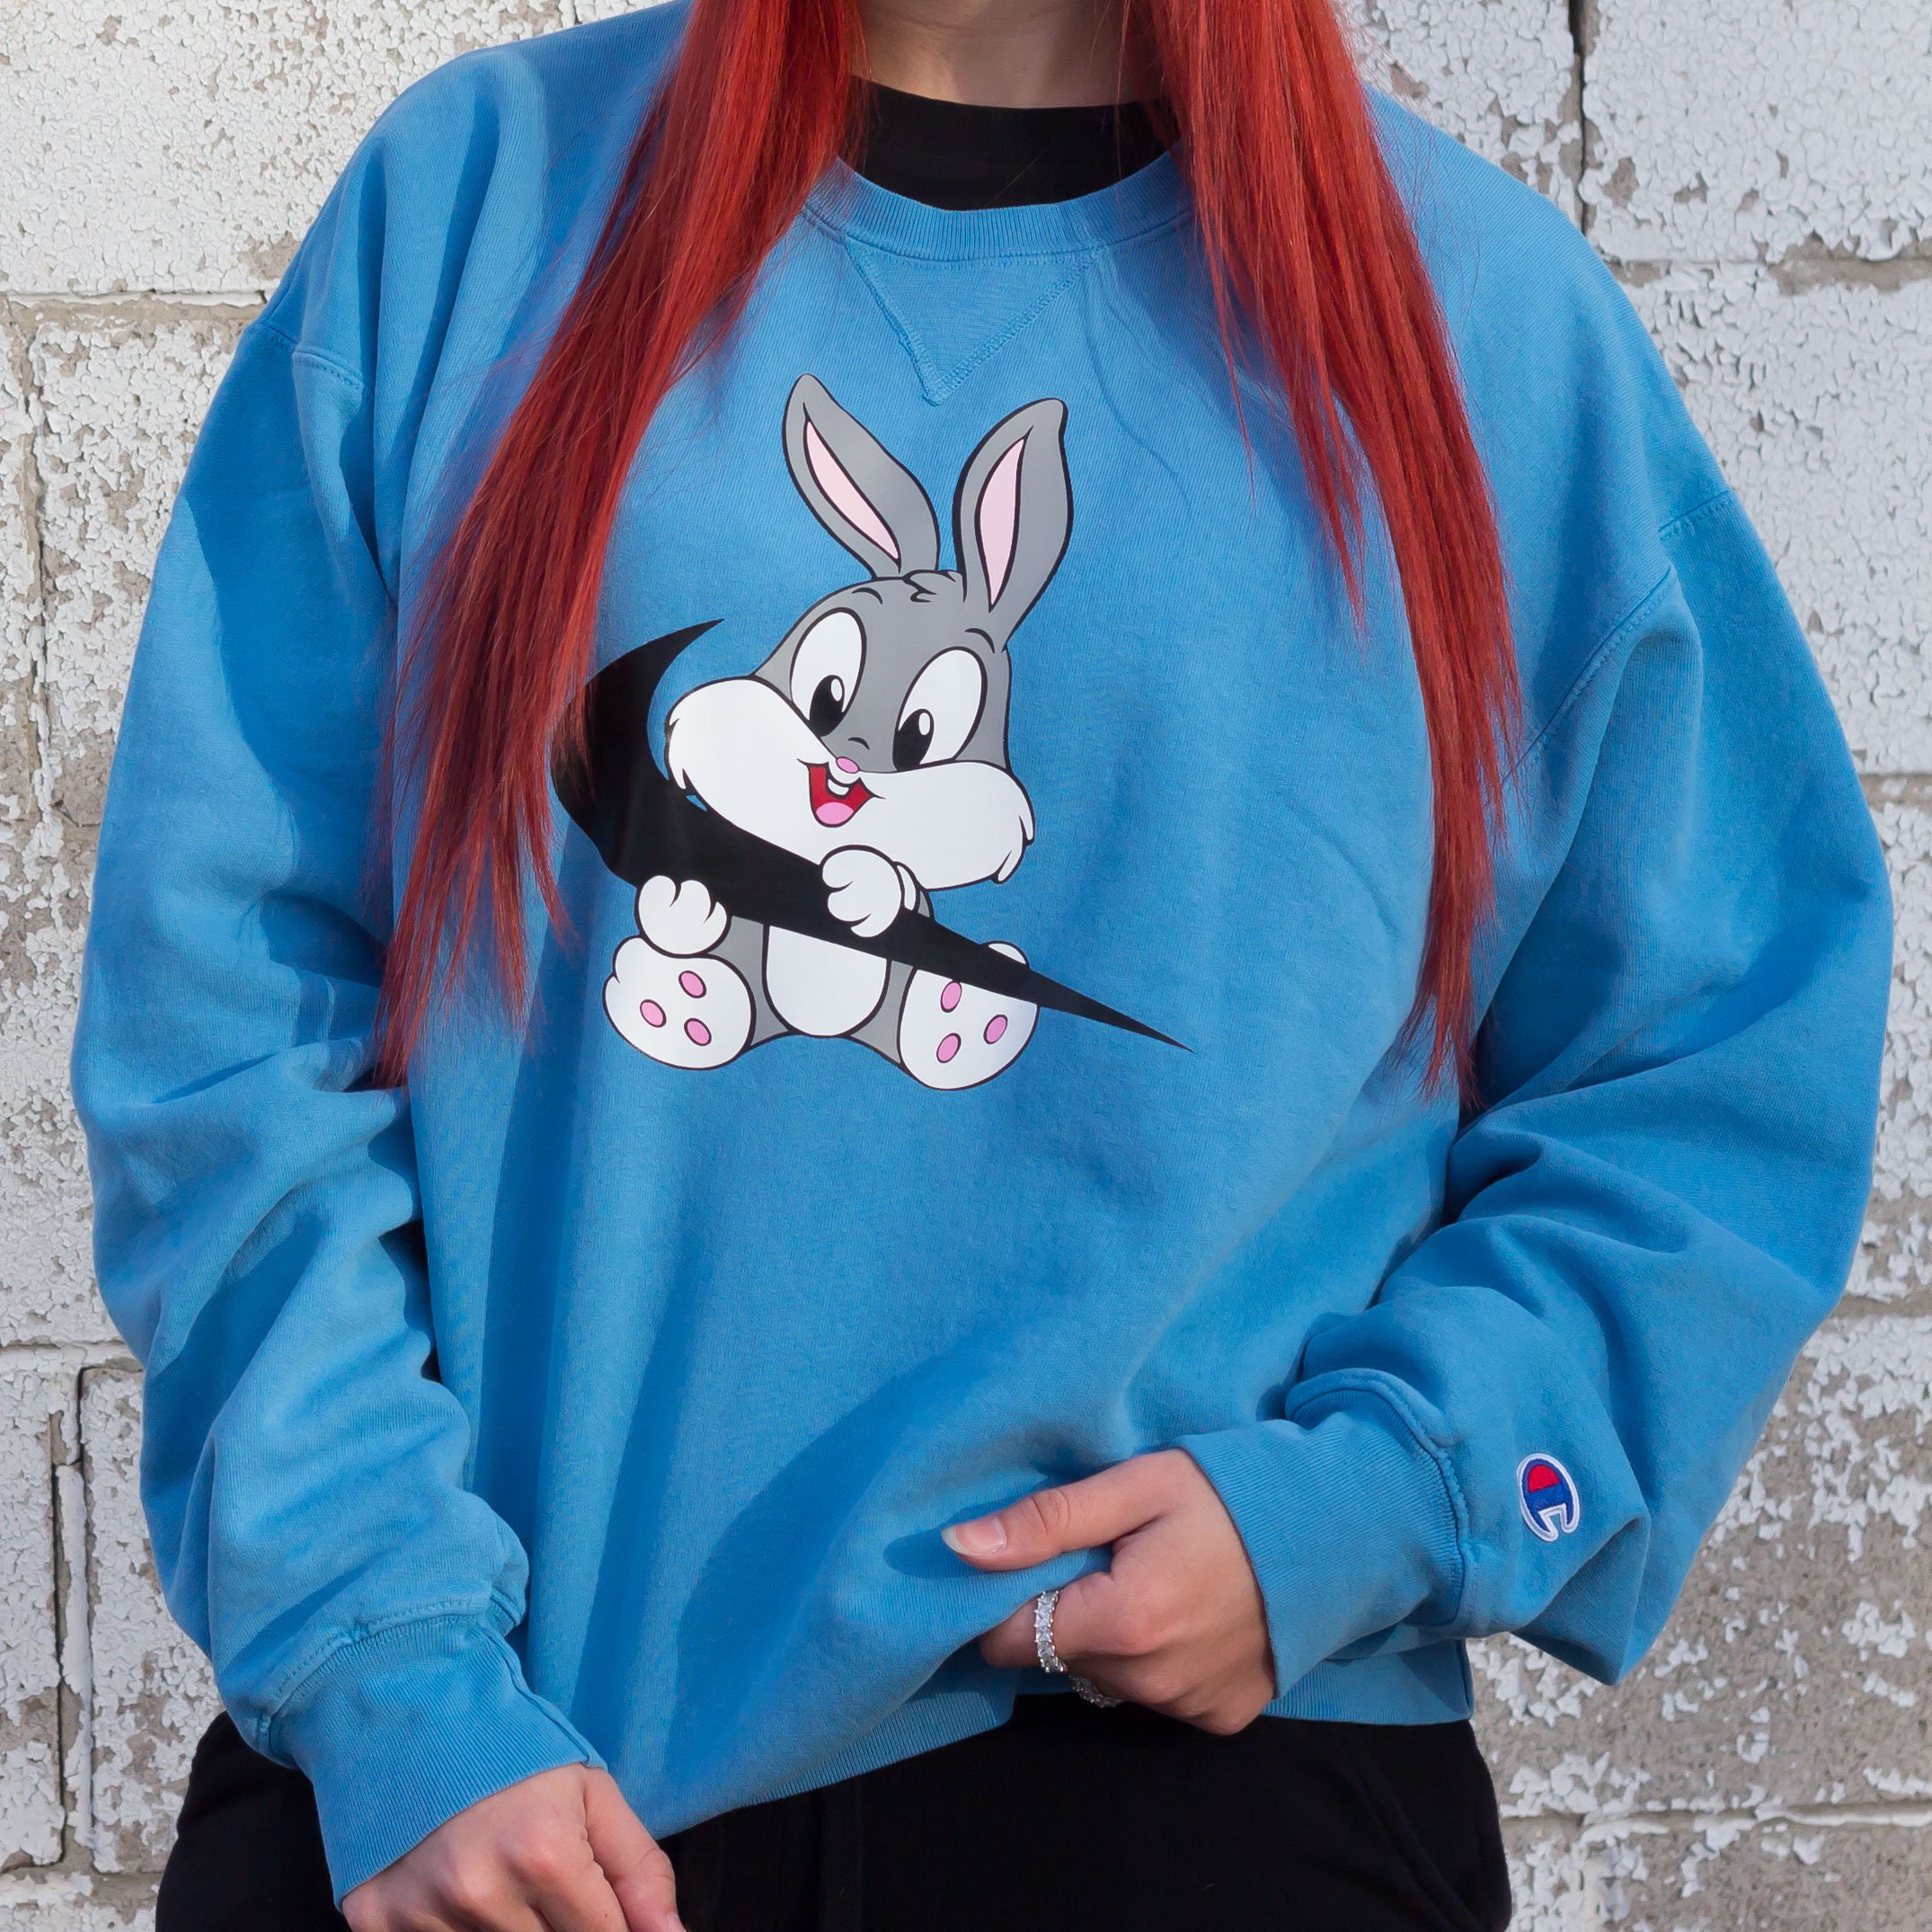 Excursion Clothing Womens Grils Rabbit Hoodie Sweater Long Sleeve Bunny Ear Pullover Tops with Pocket 